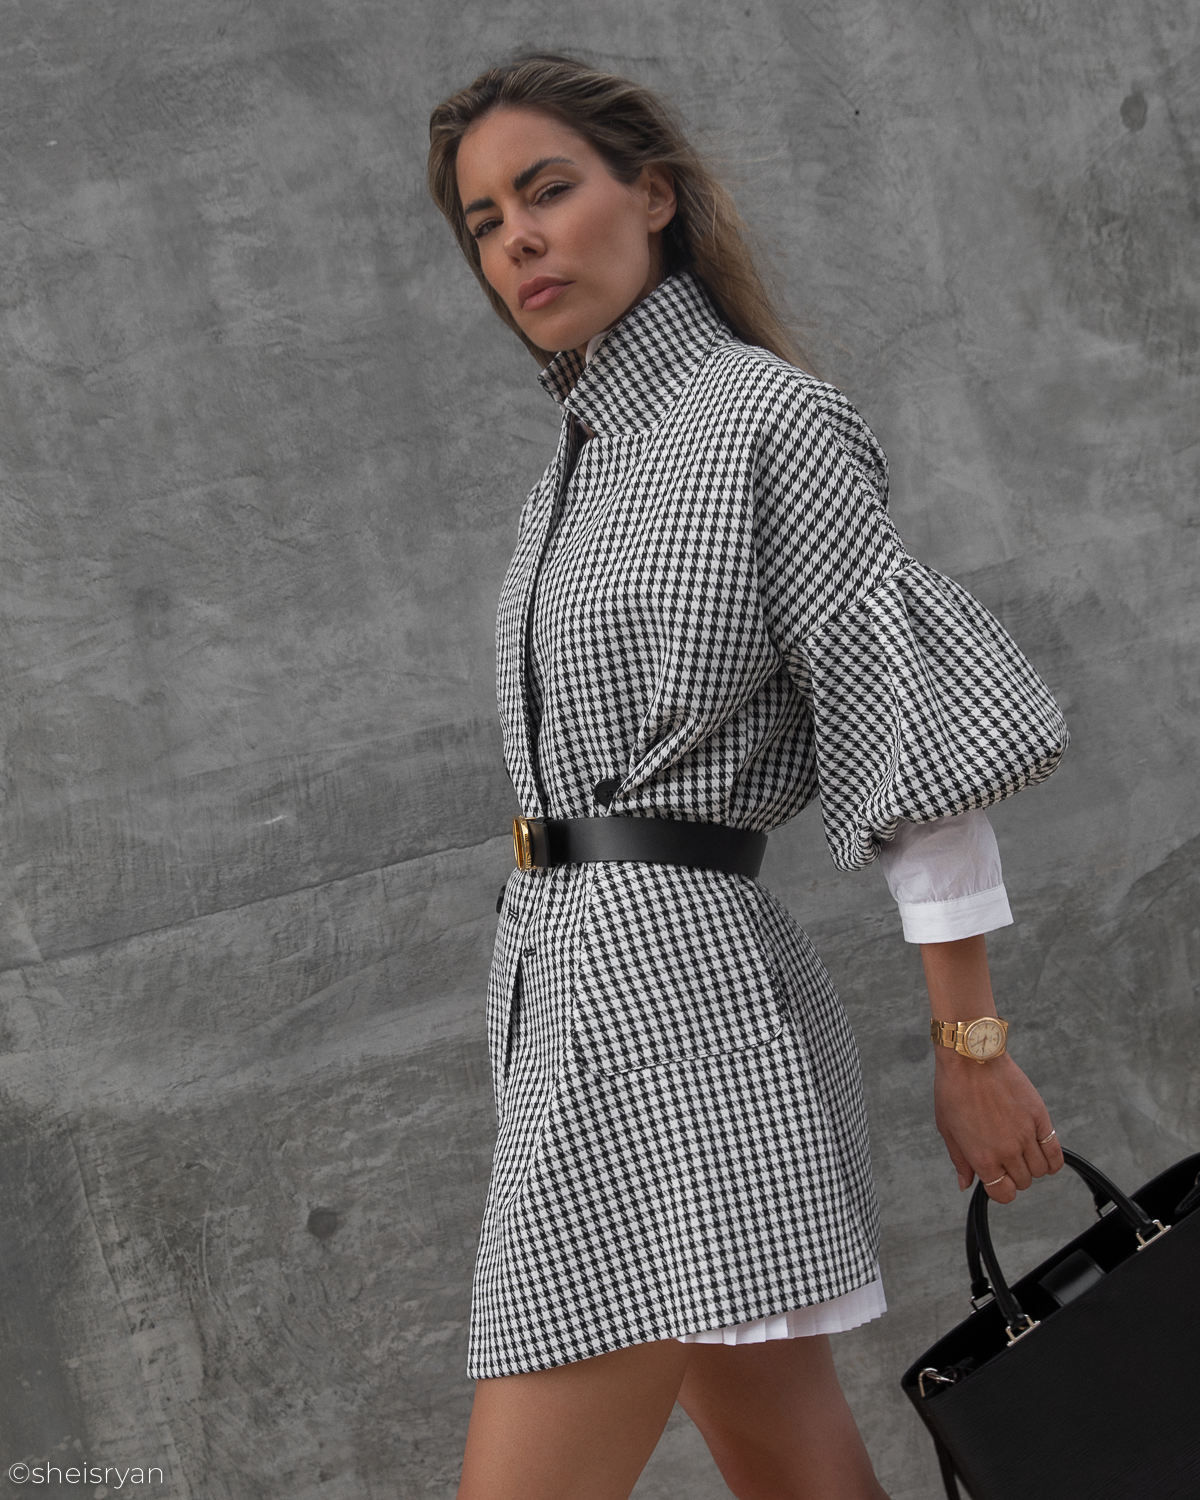 women in trending houndstooth pieces and long hair 